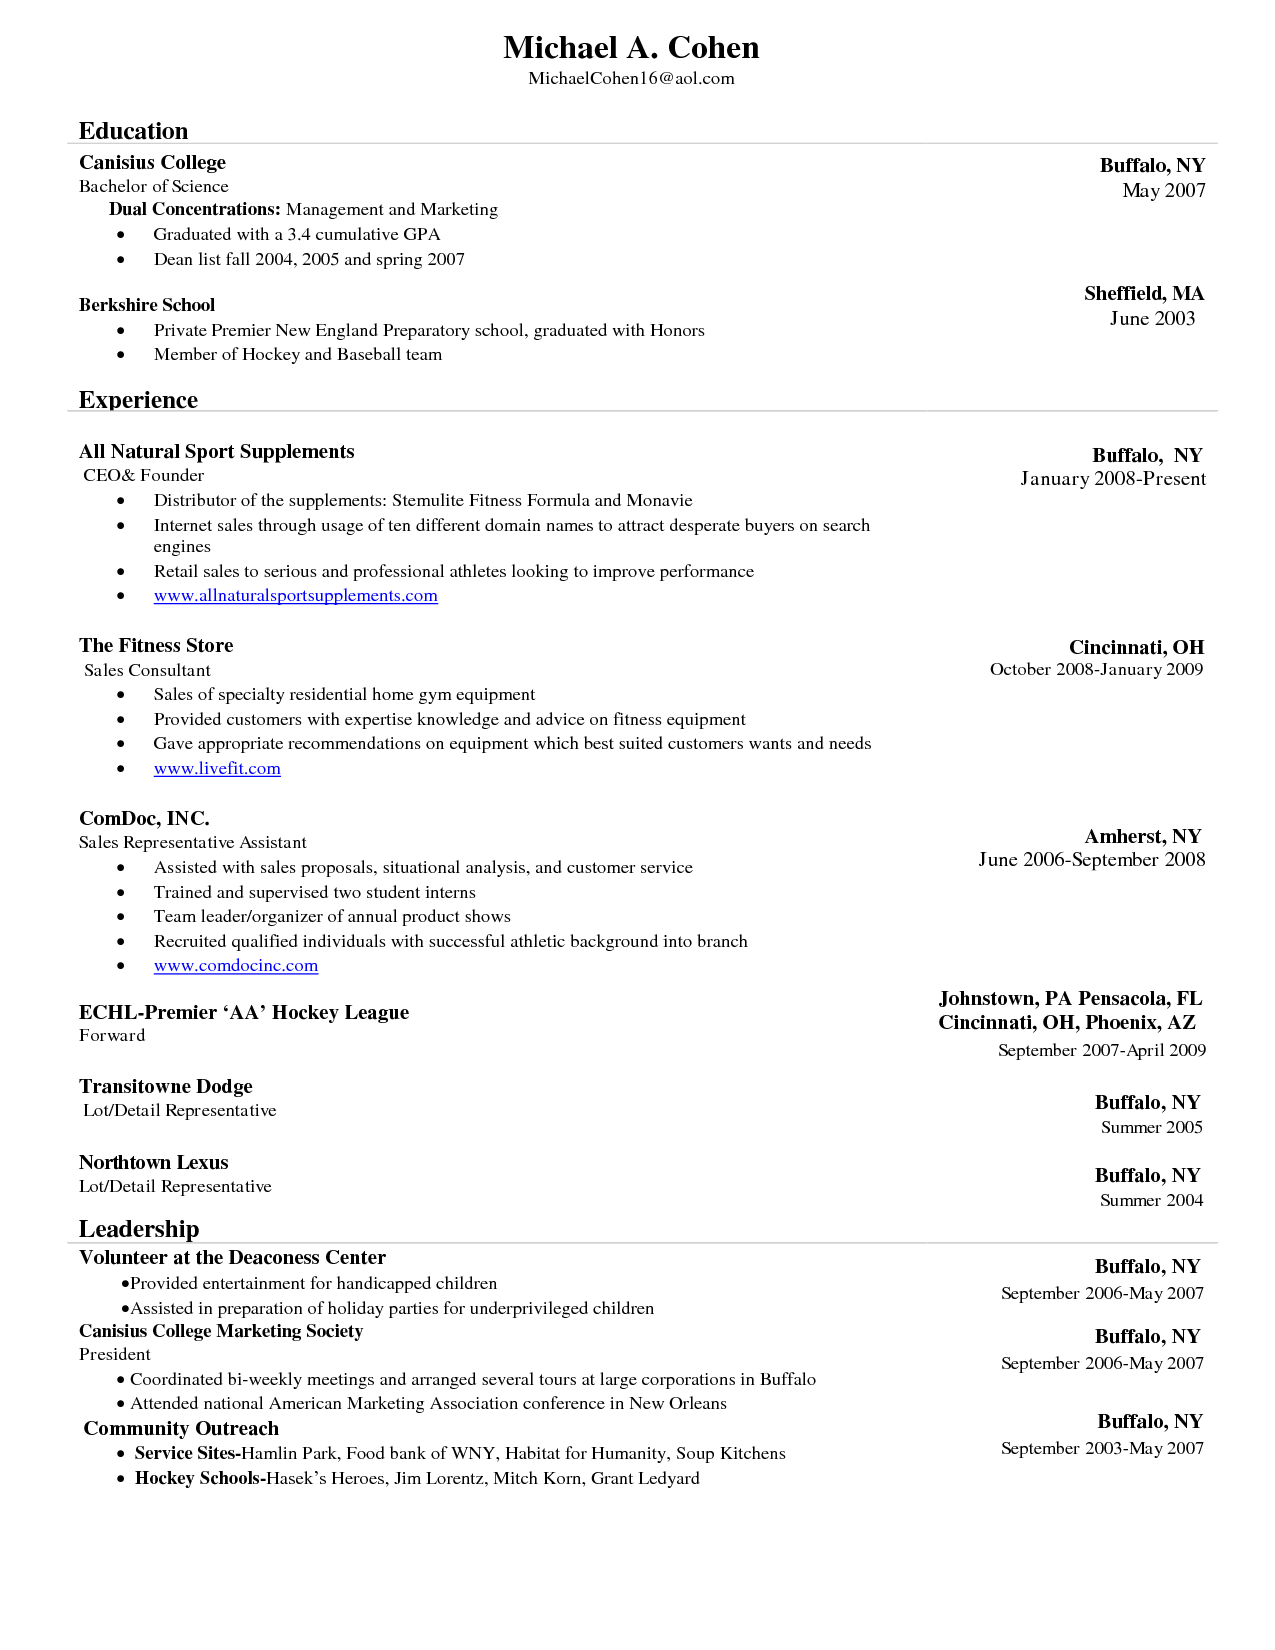 Cover Letter Template Microsoft Word 2010 - Resume Templates In Word 2010 Free Microsoft Word Templates Best